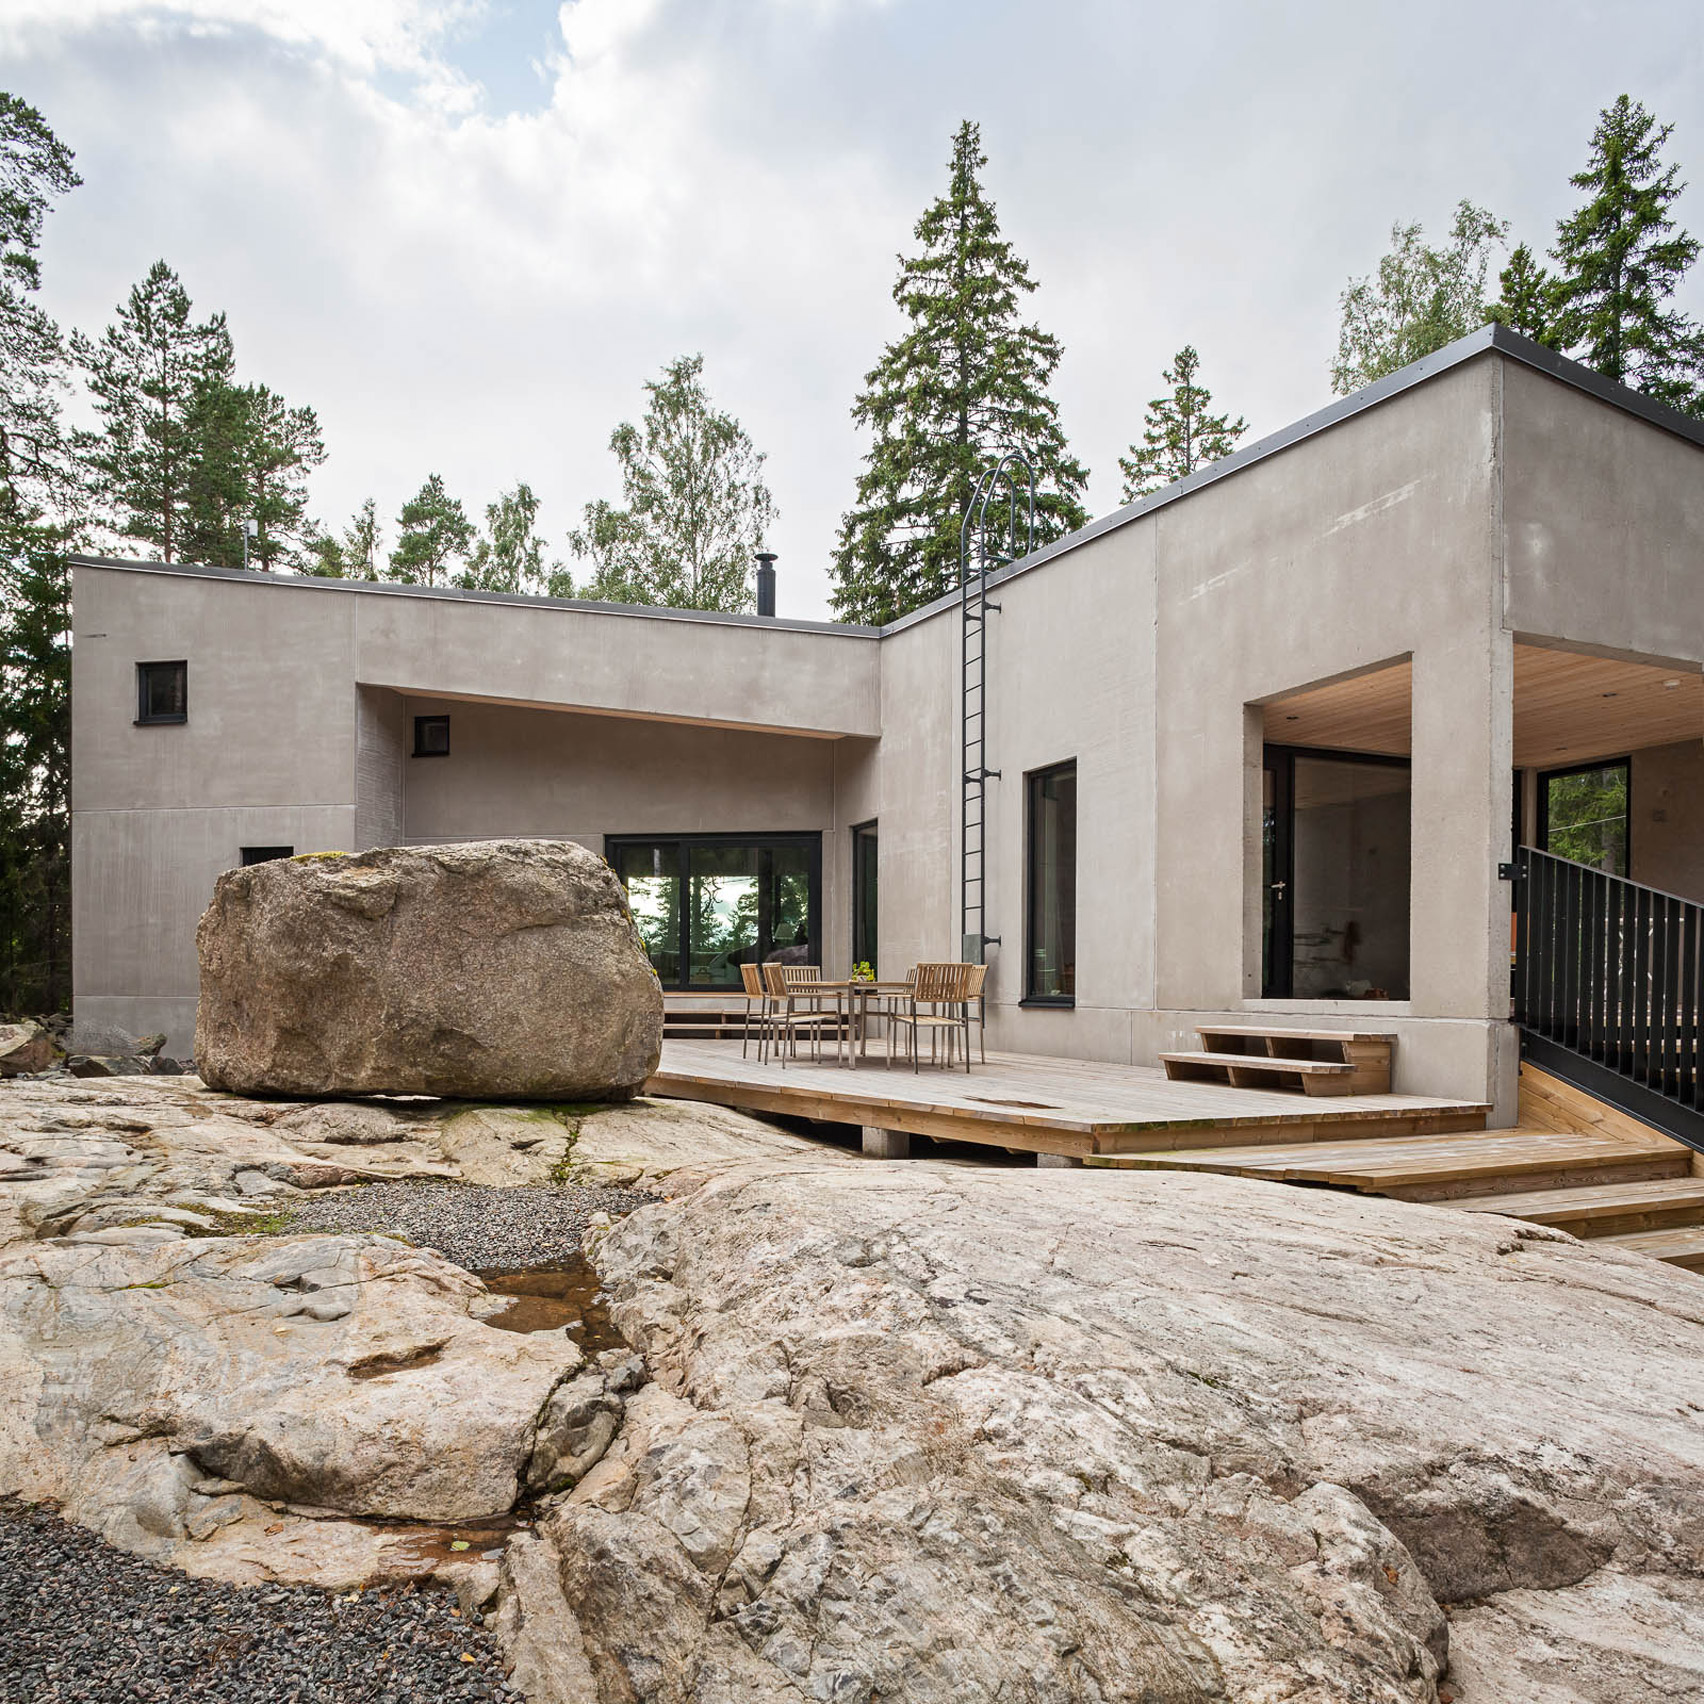 Villa K's angular concrete volumes provide views of a Finnish forest and the Baltic Sea